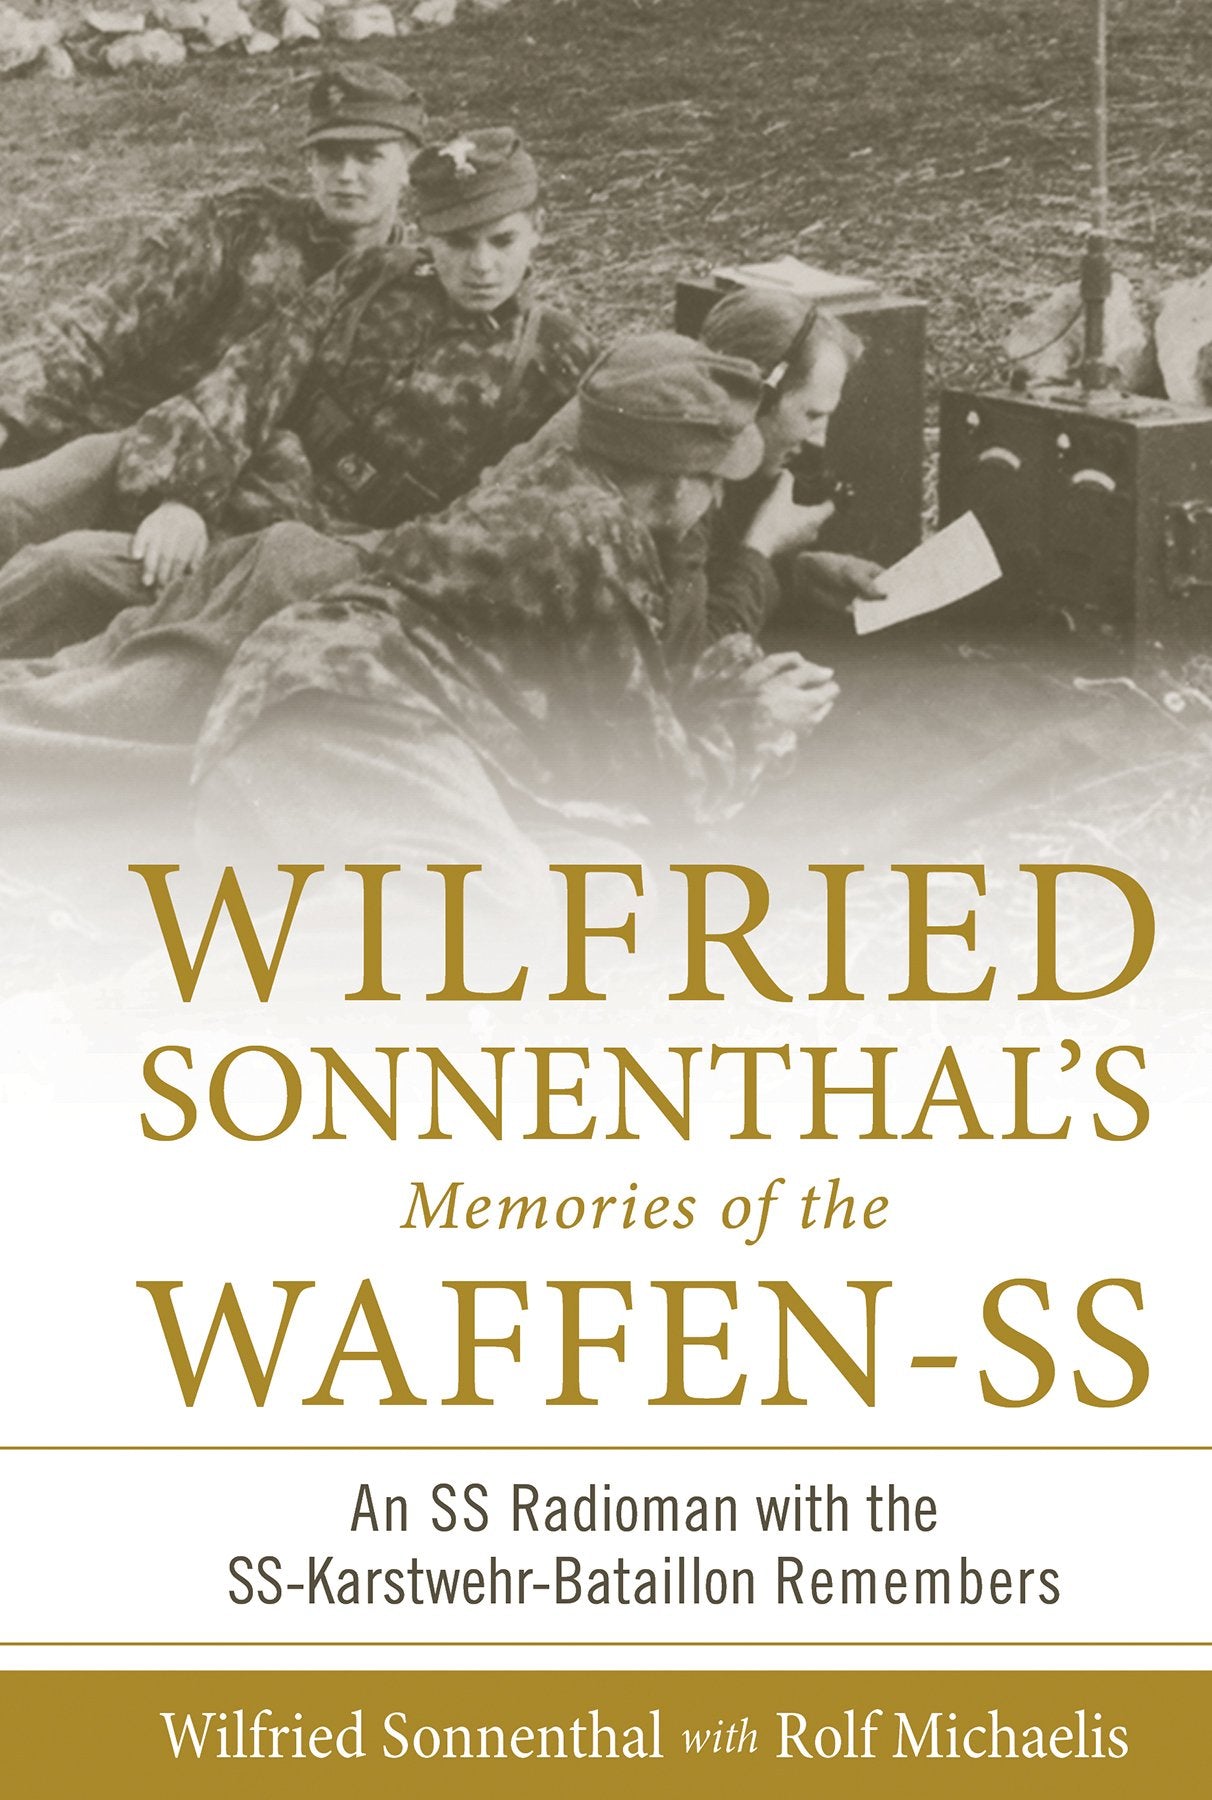 Wilfried Sonnenthal's Memories of the Waffen-SS